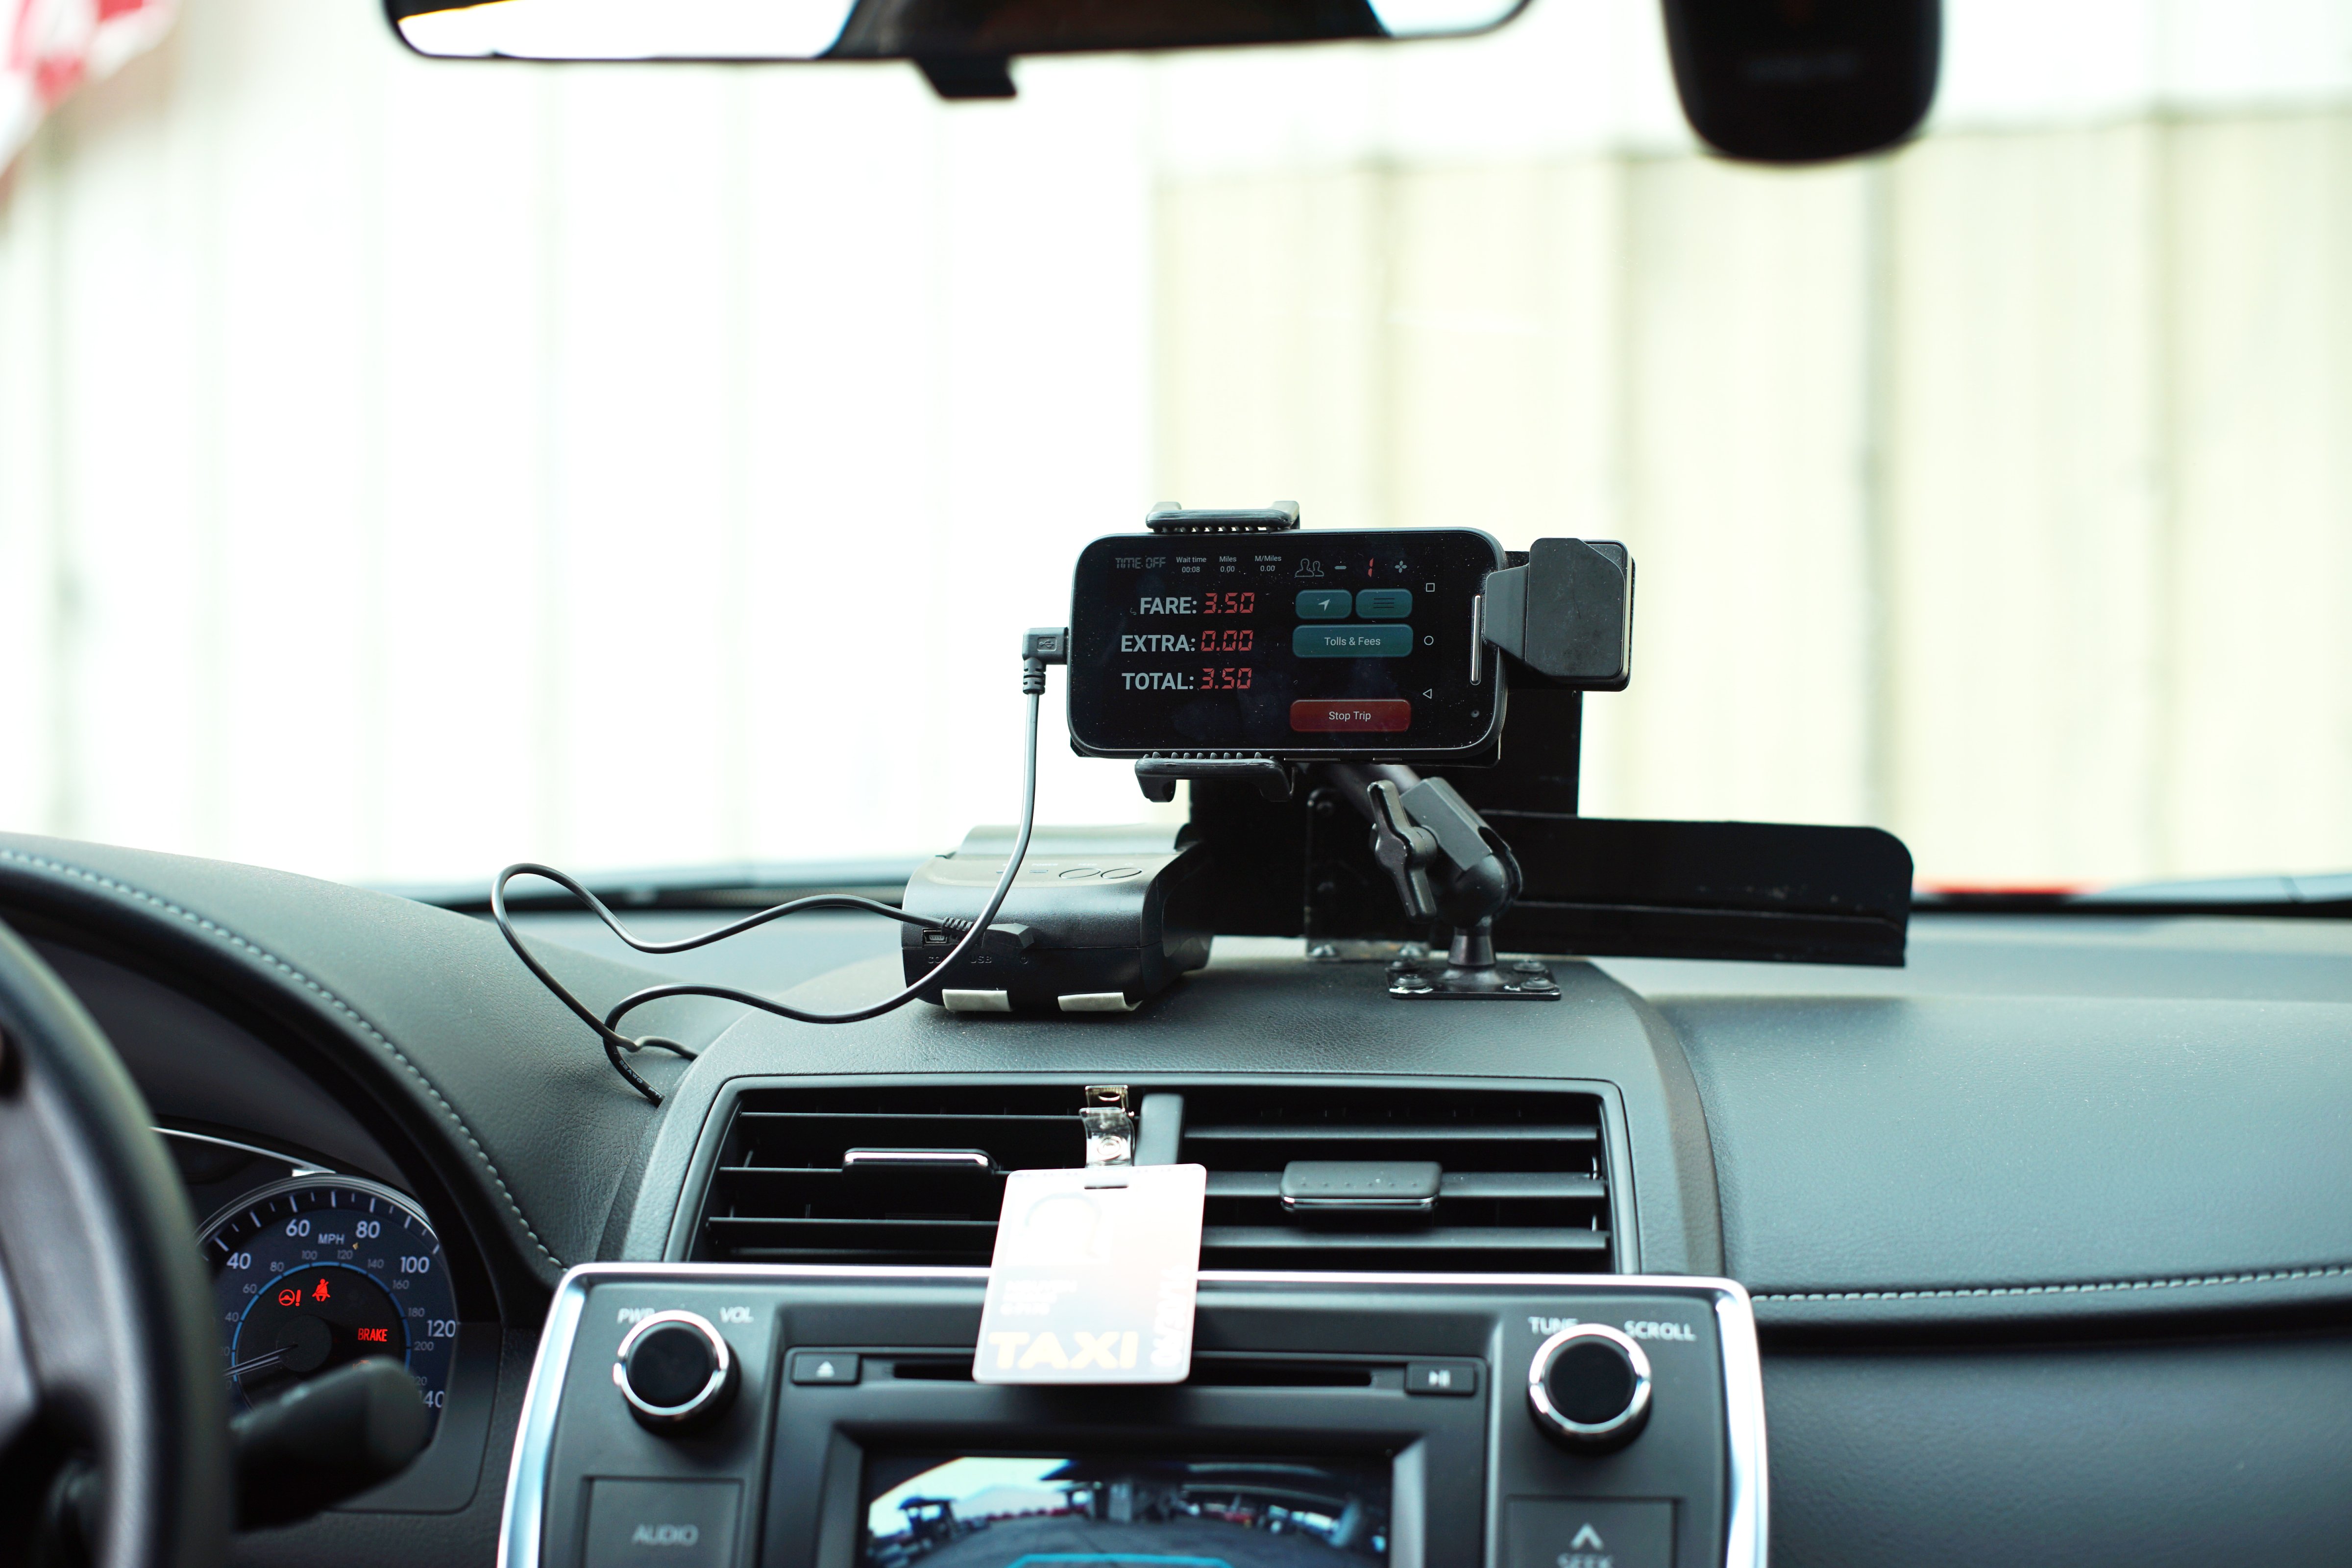 Taxi-app company Flywheel is touting TaxiOS as the first "all-in-one" hardware and software platforms for cabs. (Courtesy of Flywheel)